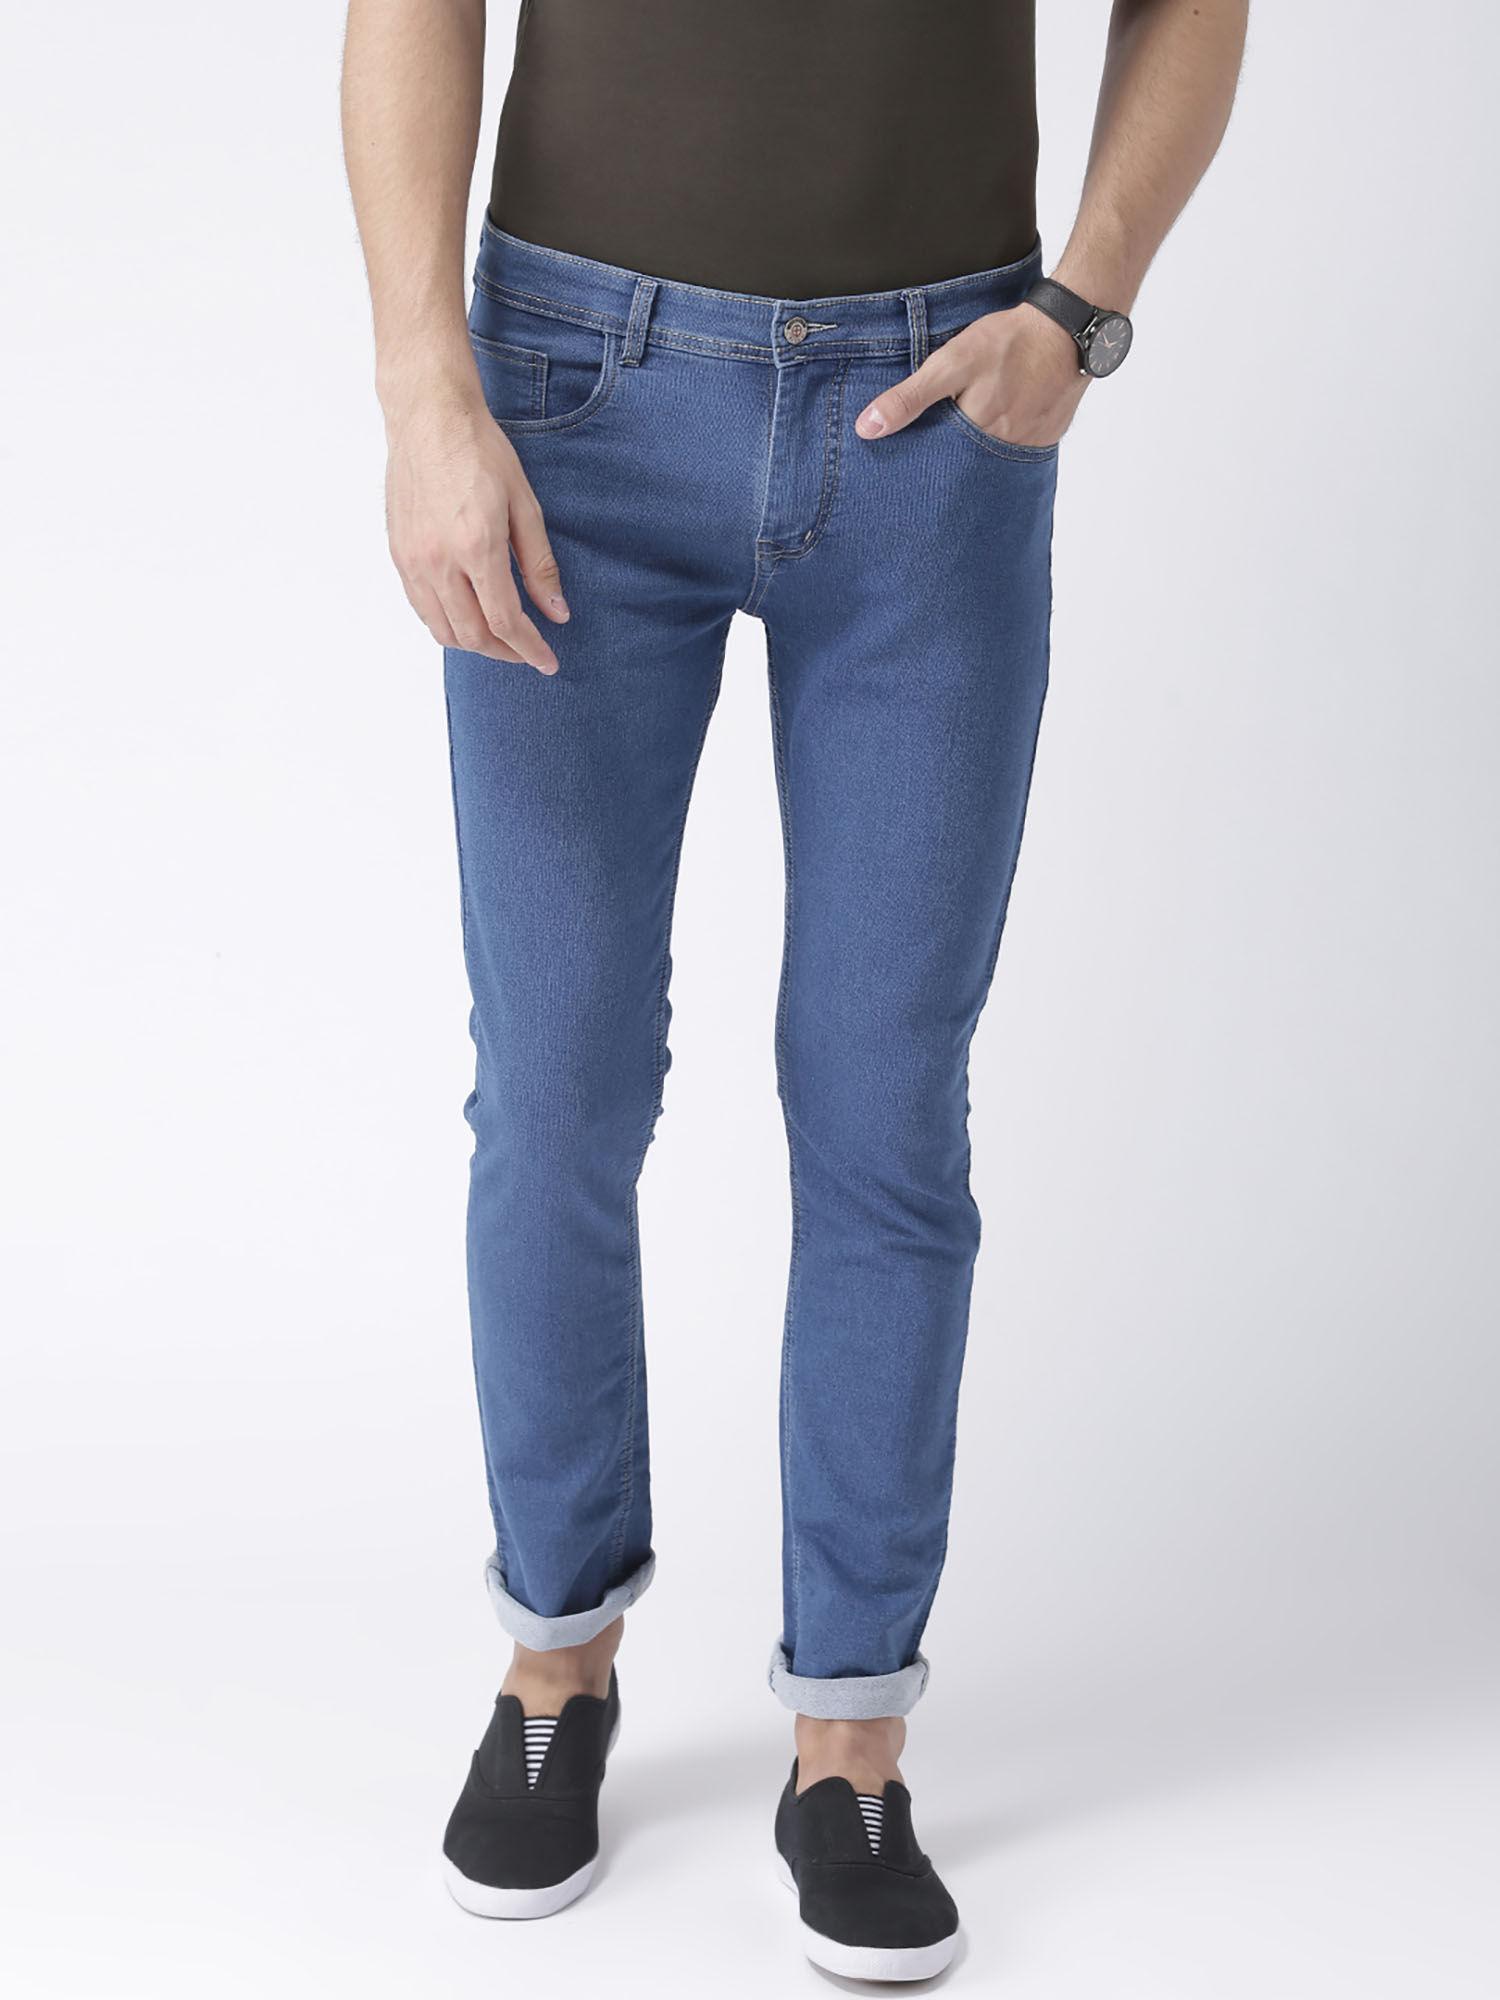 blue solid jeans